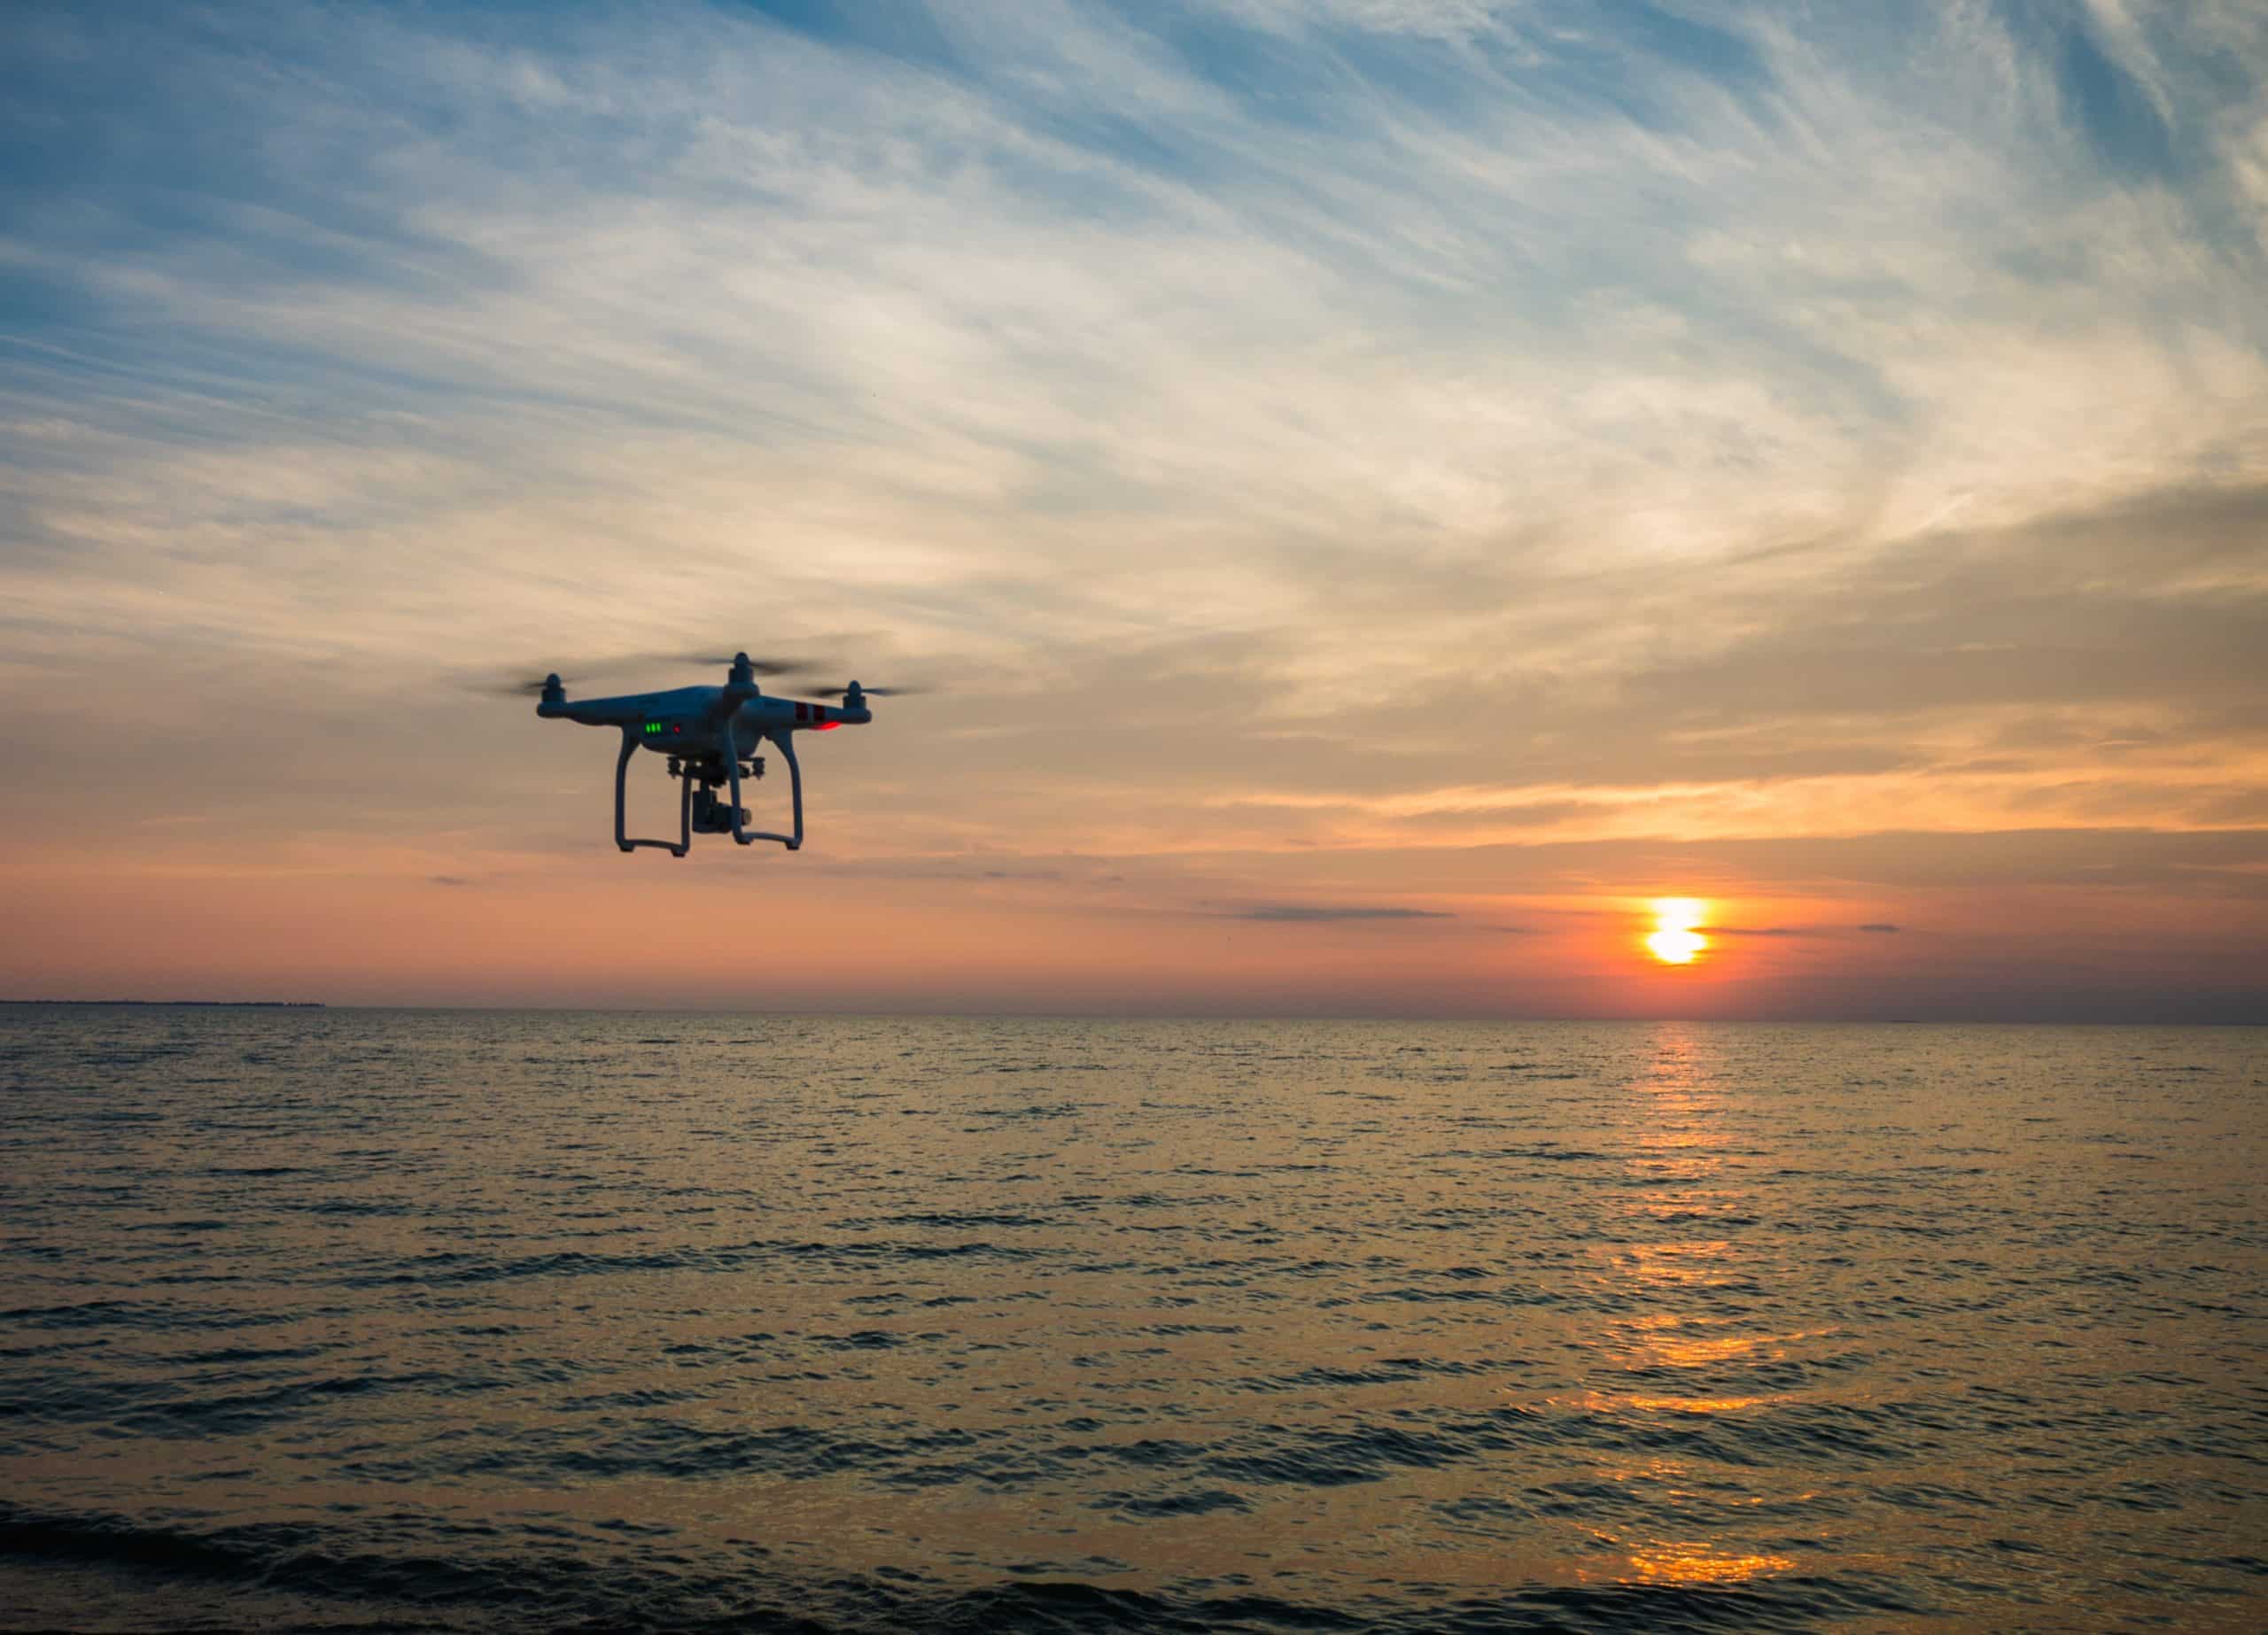 Conservationists applaud Queensland’s further investment in drone surveillance on beaches